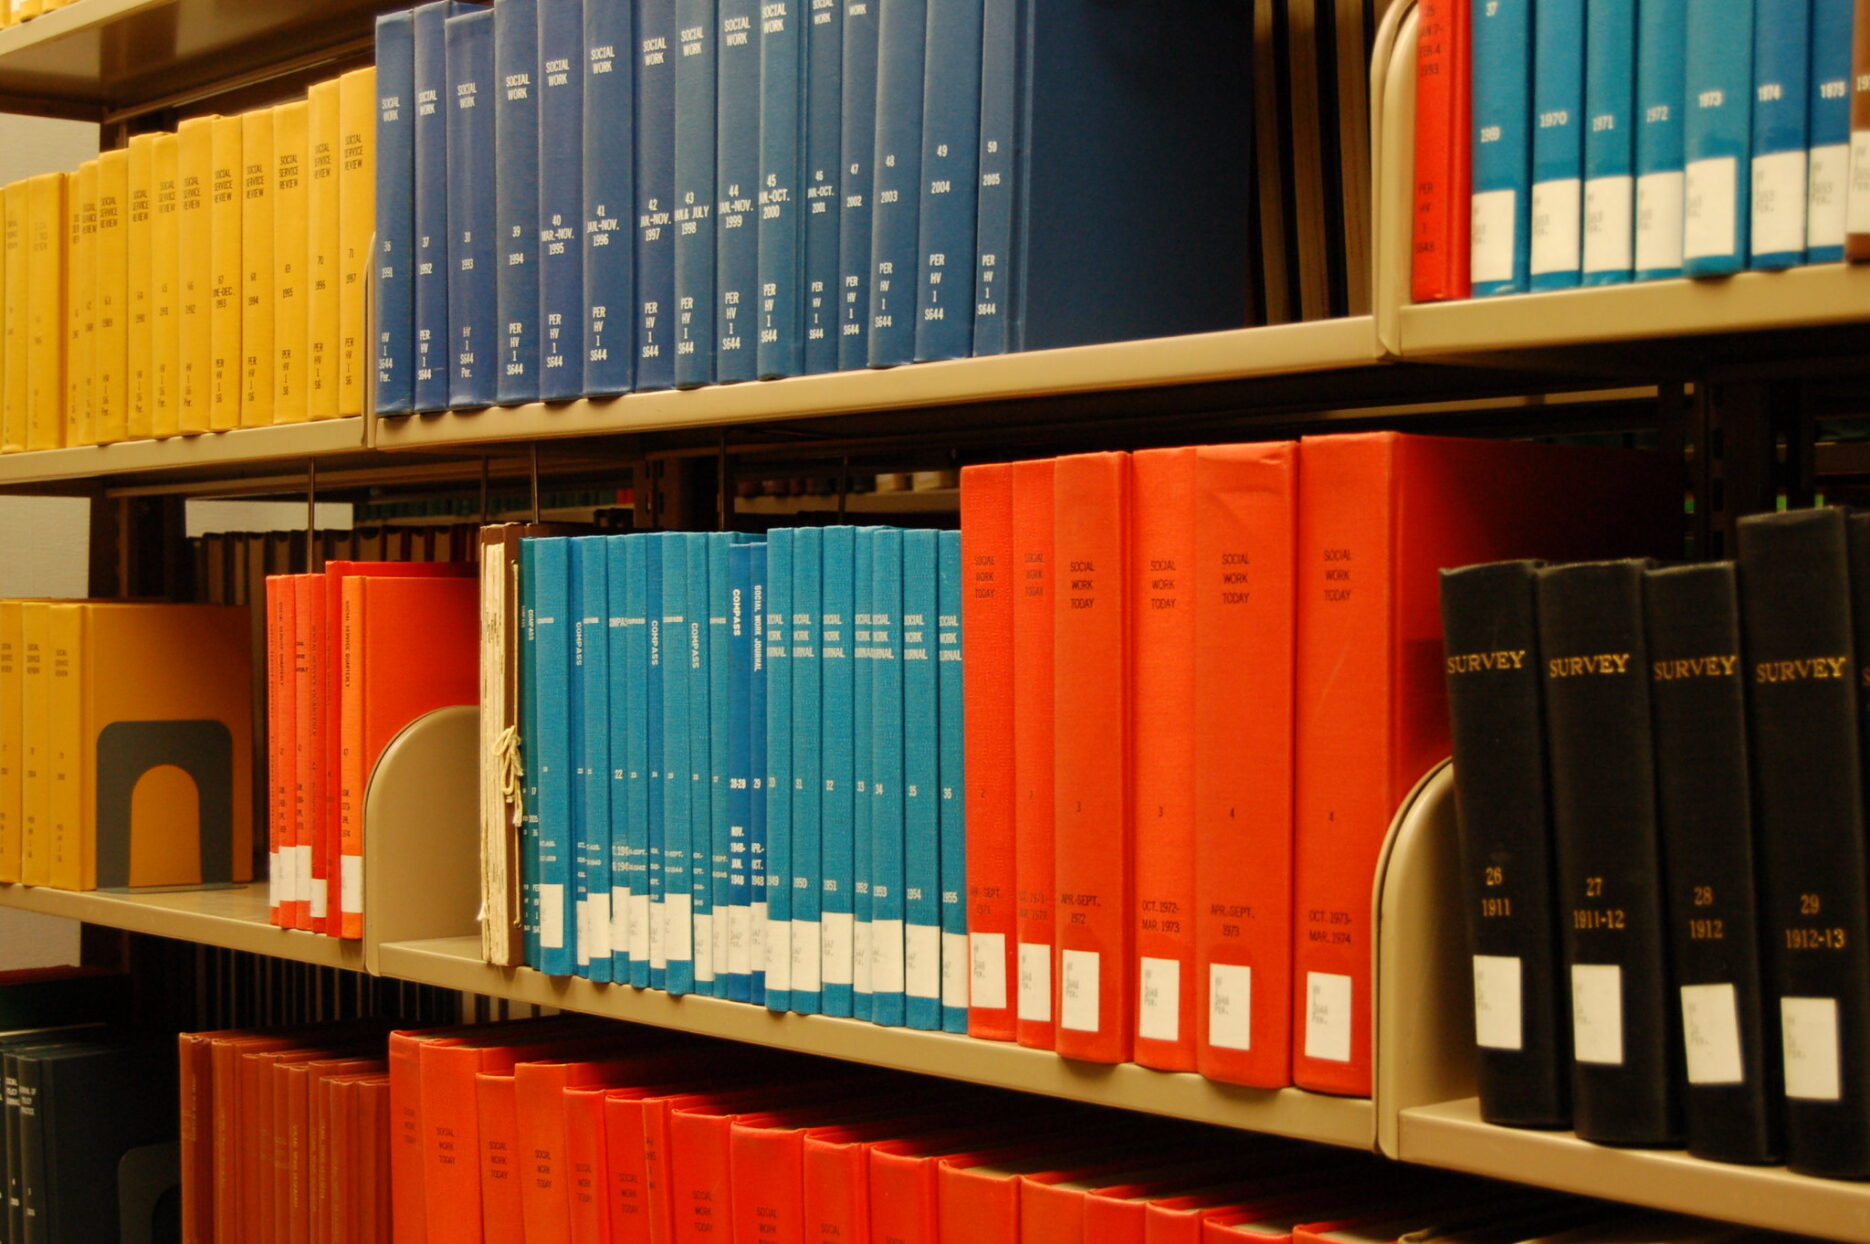 Shelf of bound periodicals in a library